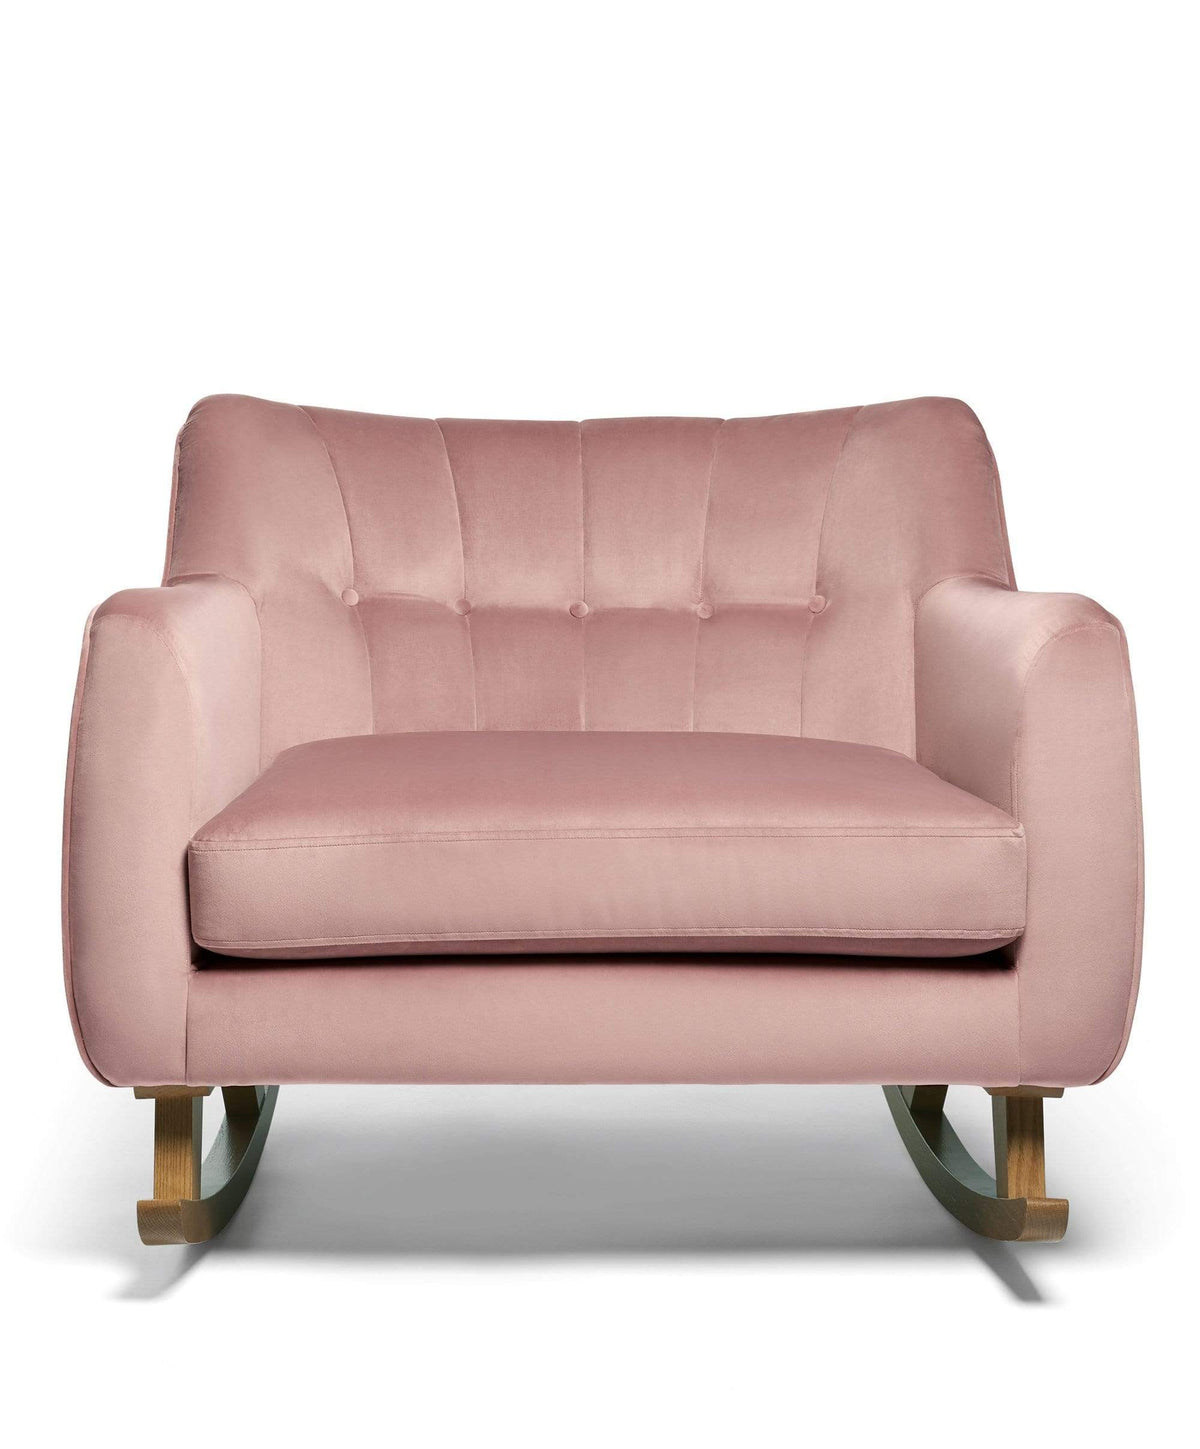 Pink Snuggle Chair Uk Deals Store